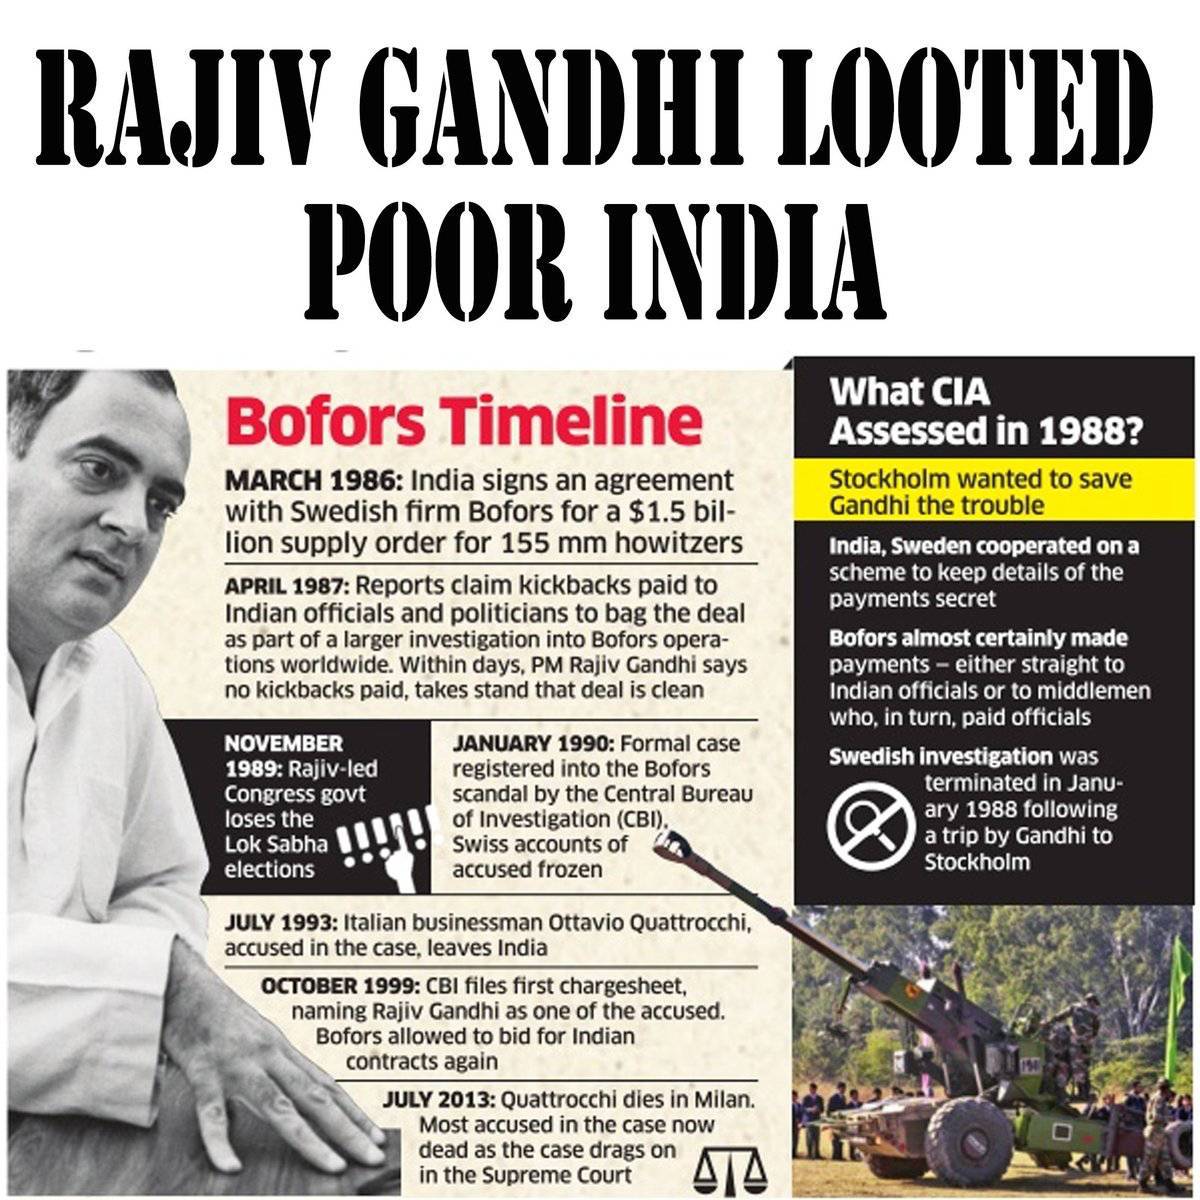 The Bofors scam was one of Indias biggest political scandals that happened between India and Sweden in 1980s and 1990s